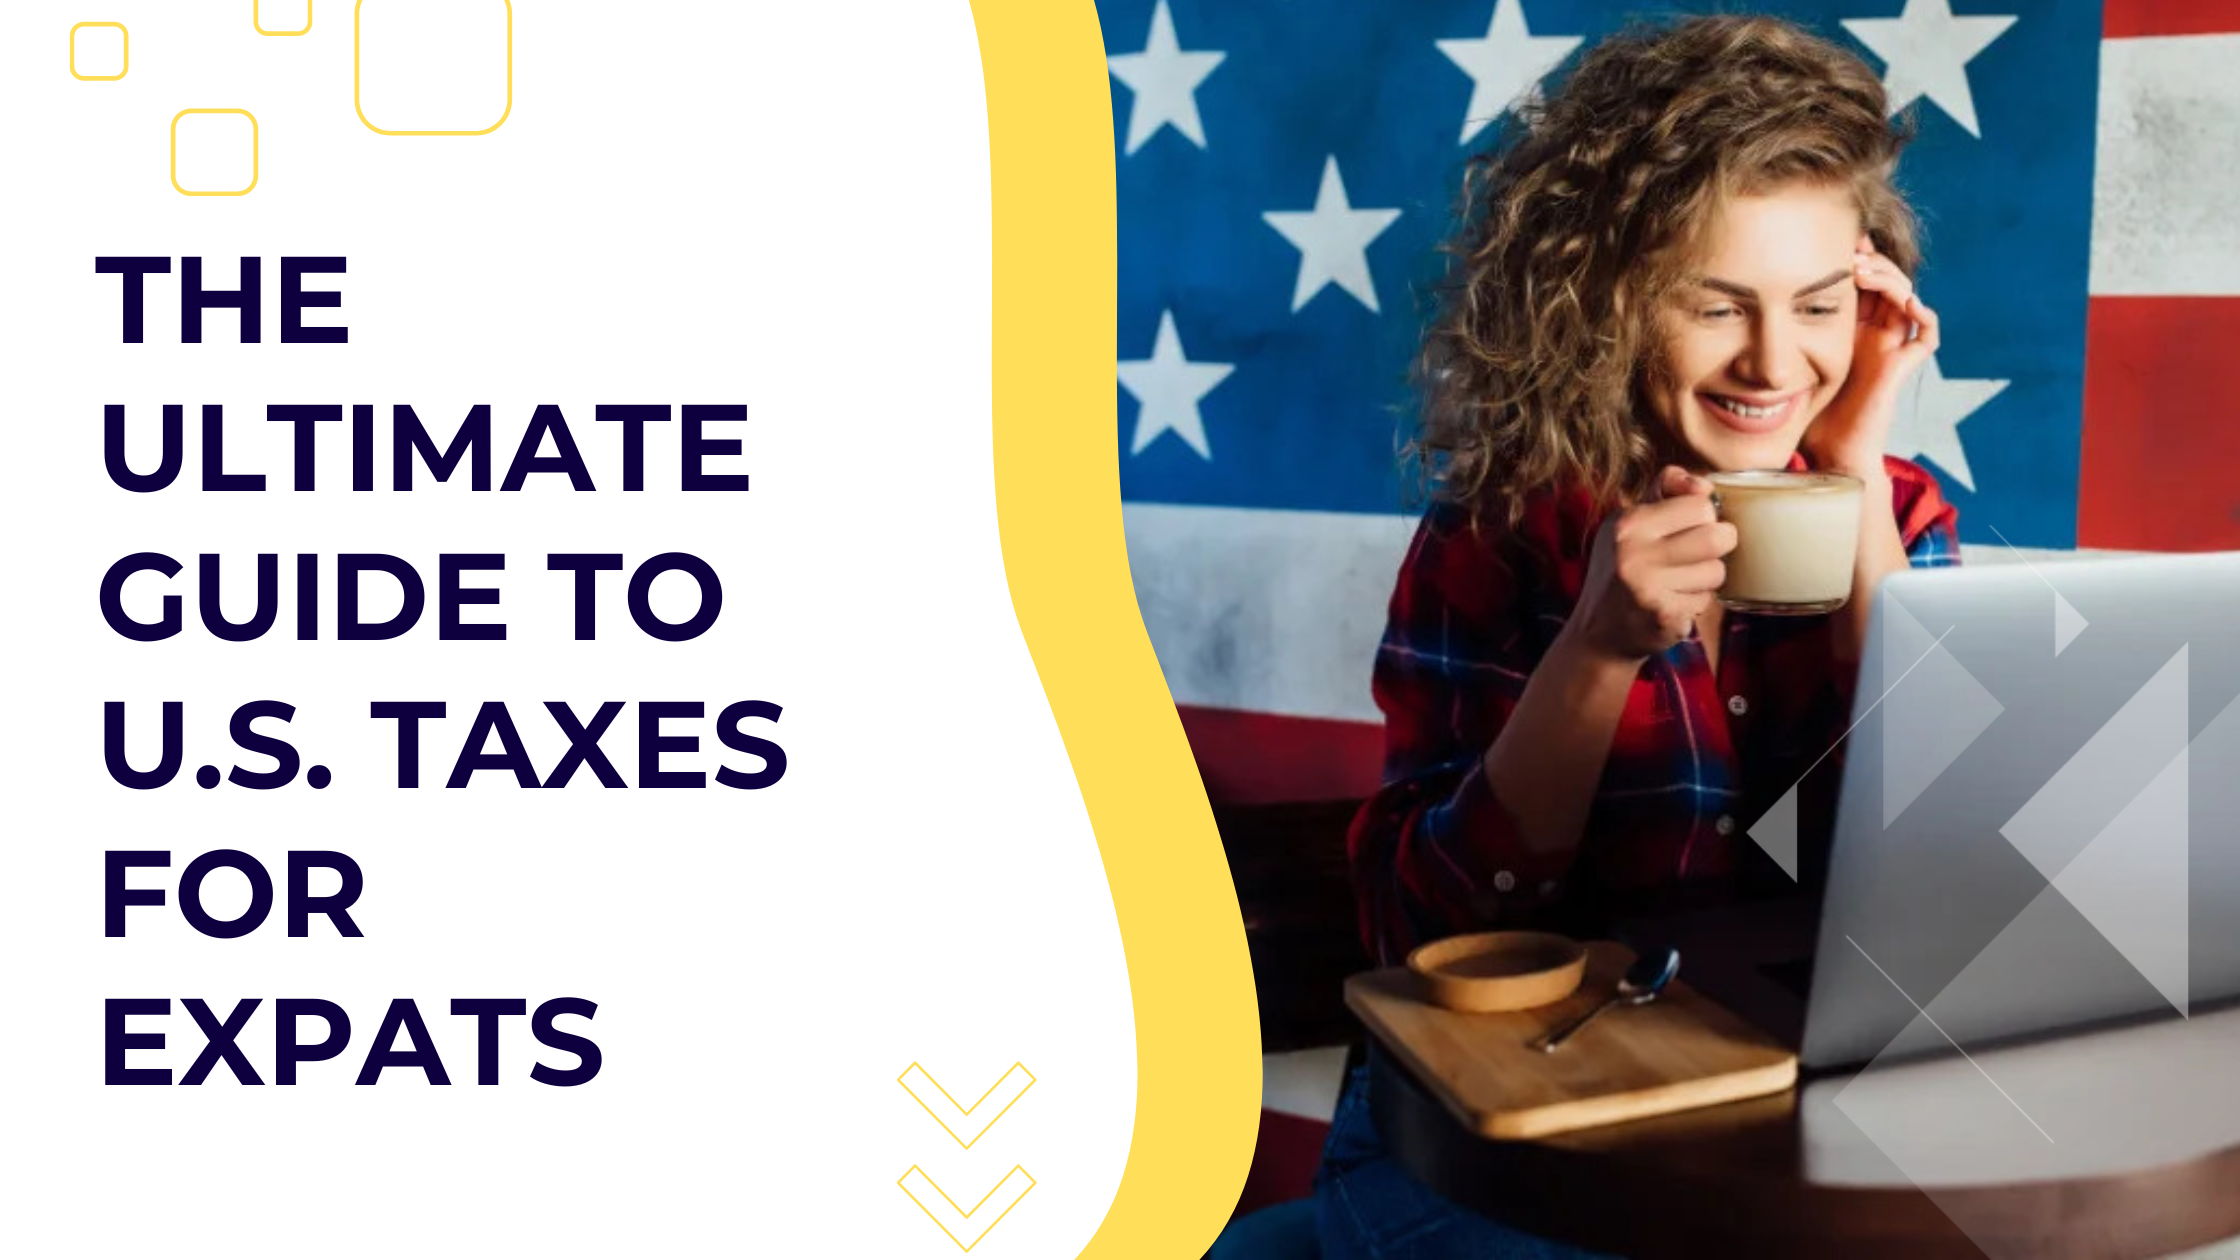 The Ultimate Guide to the U.S. Taxes for Expats